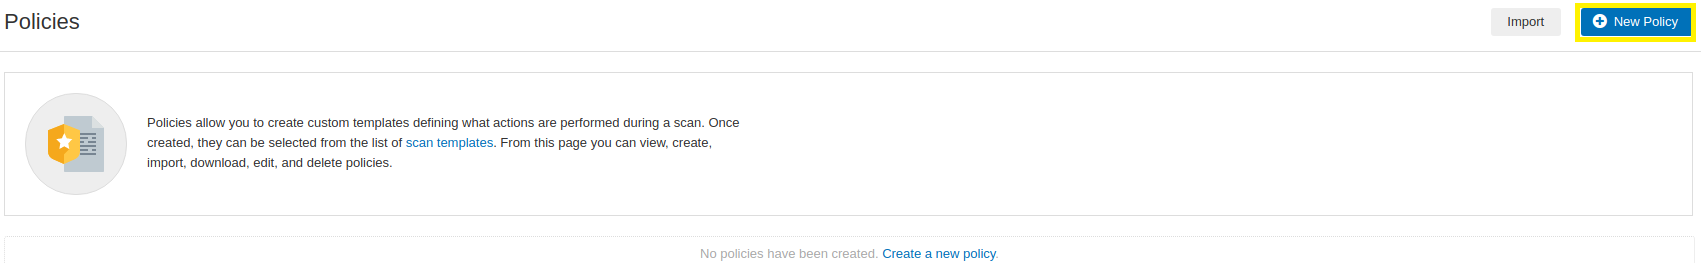 Creating a New Policy from the Nessus Policies page.